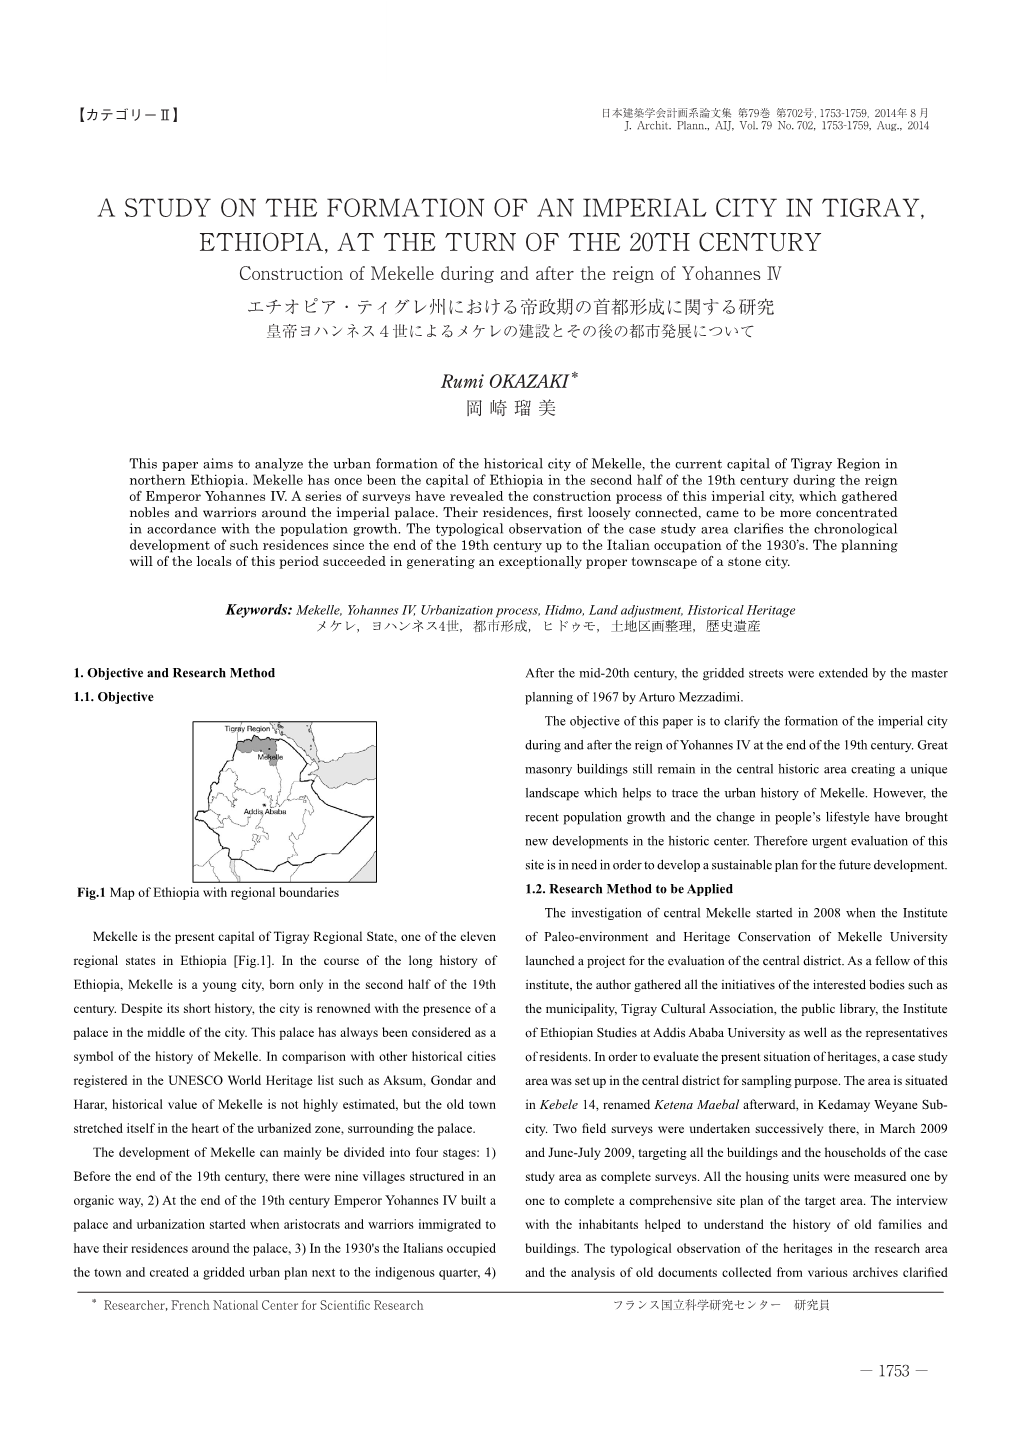 A Study on the Formation of an Imperial City in Tigray